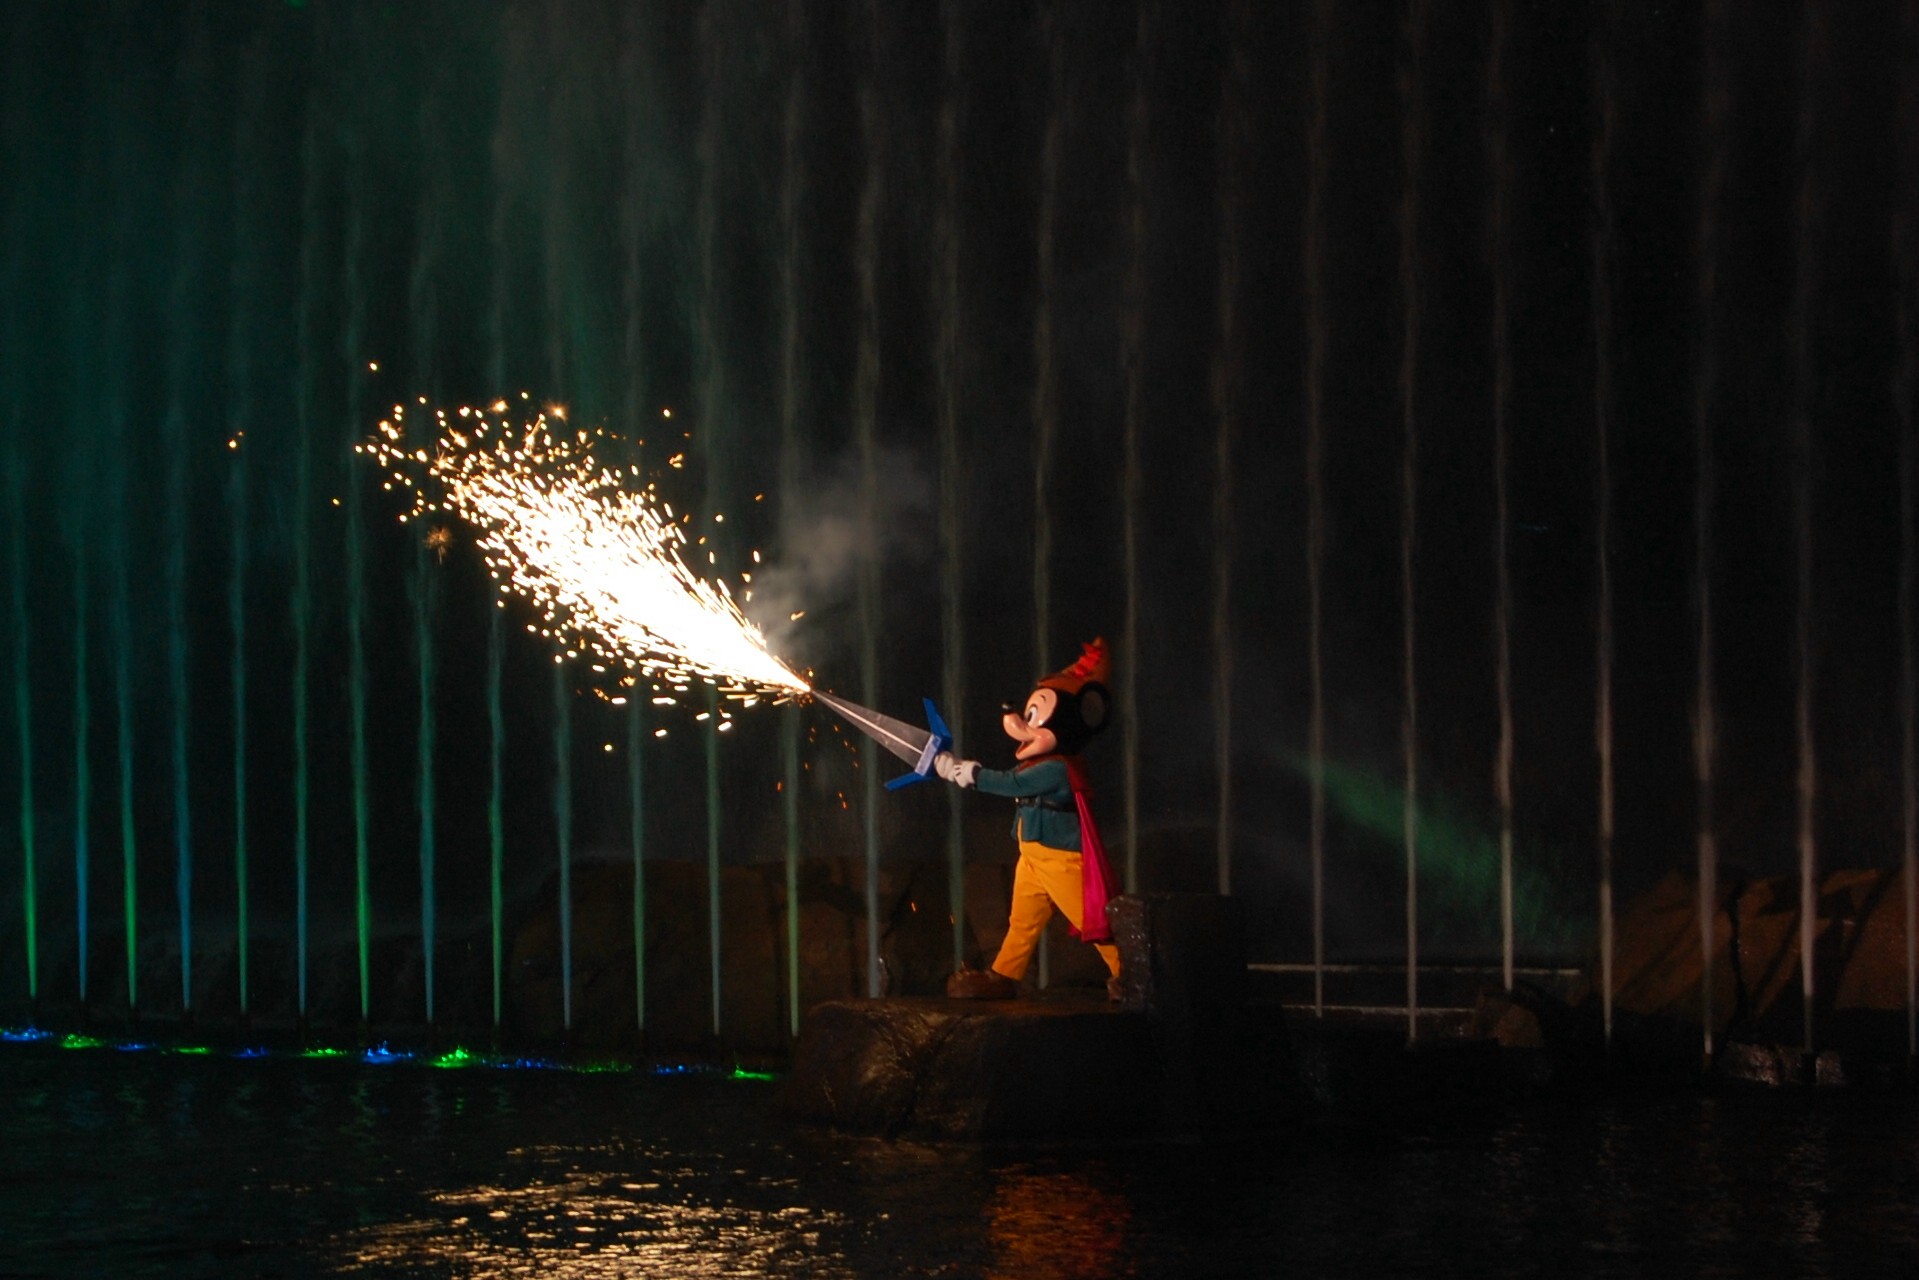 DHS: Fantasmic: Mickey with His Sword